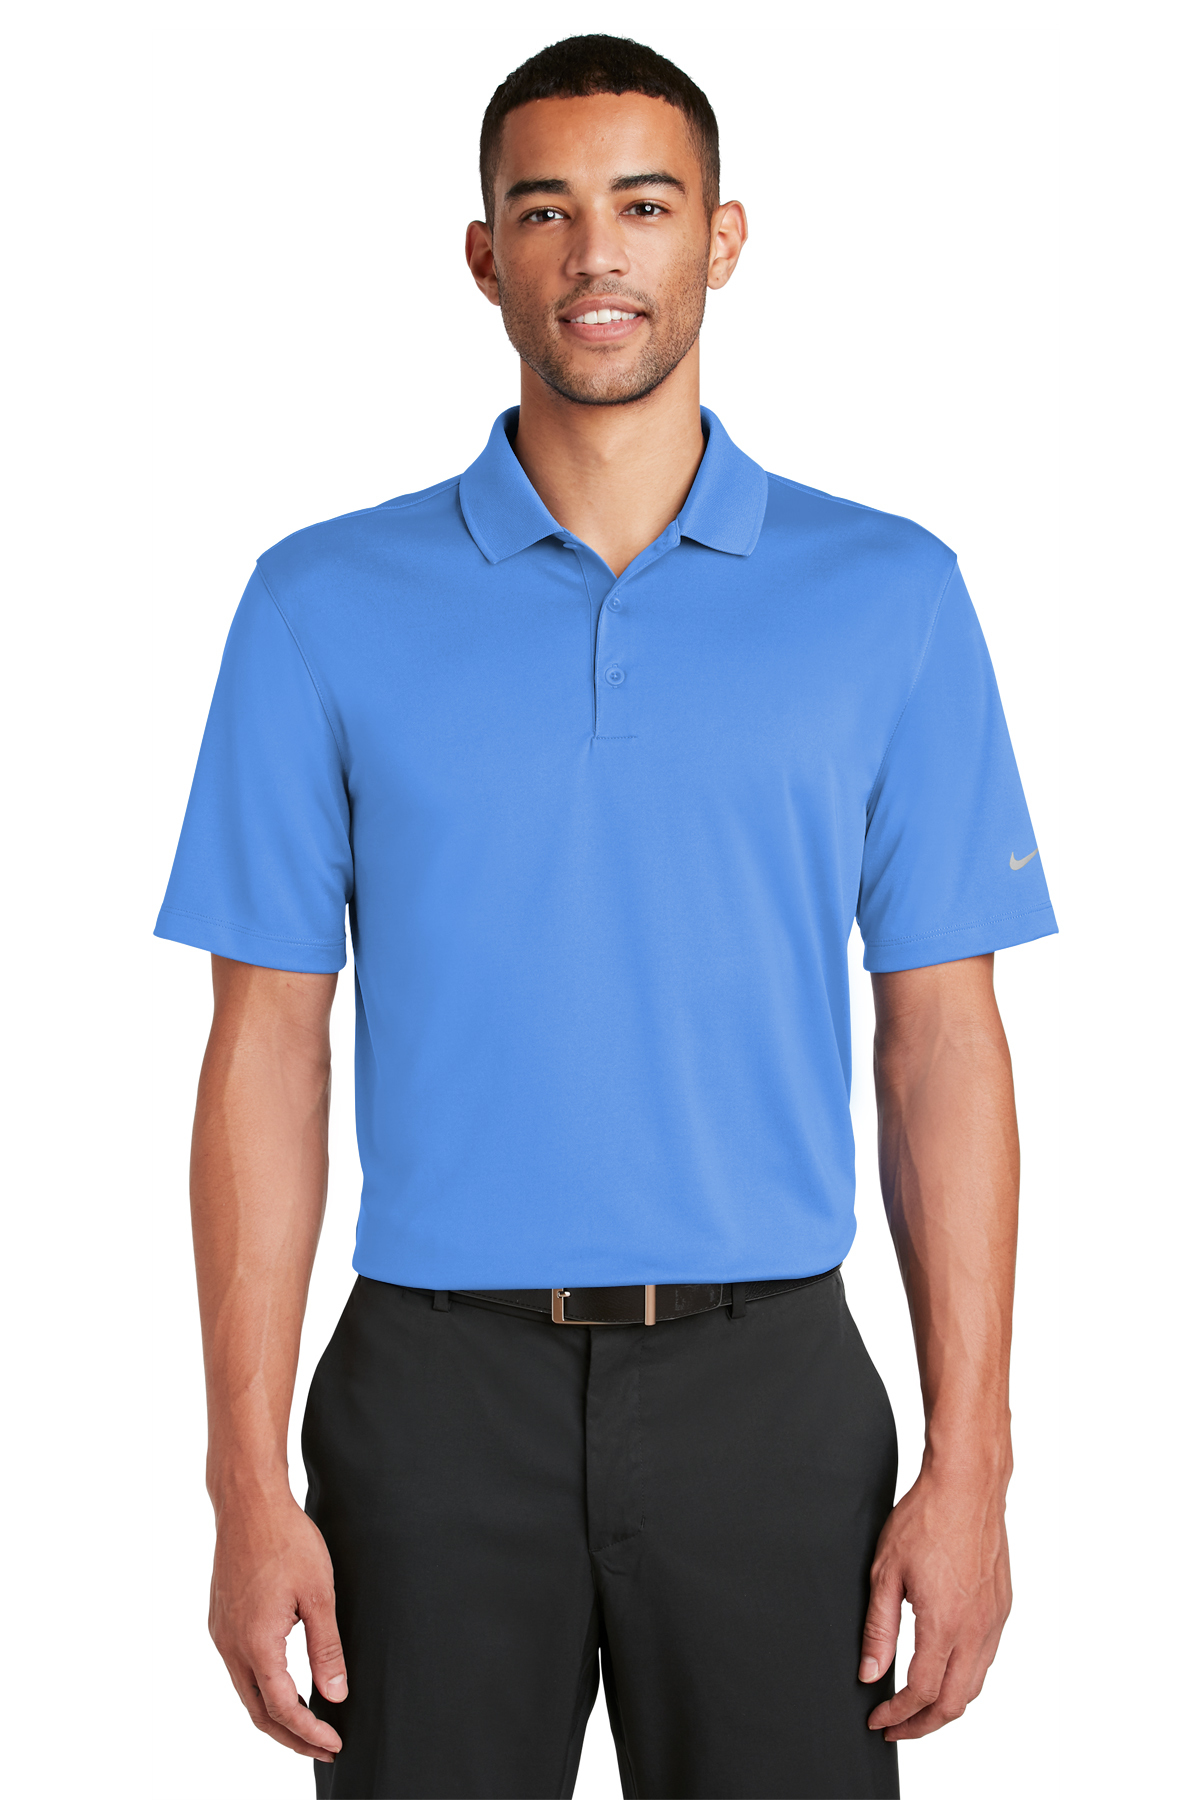 Nike Dri-FIT Classic Fit Players Polo with Knit Collar | | Company Casuals